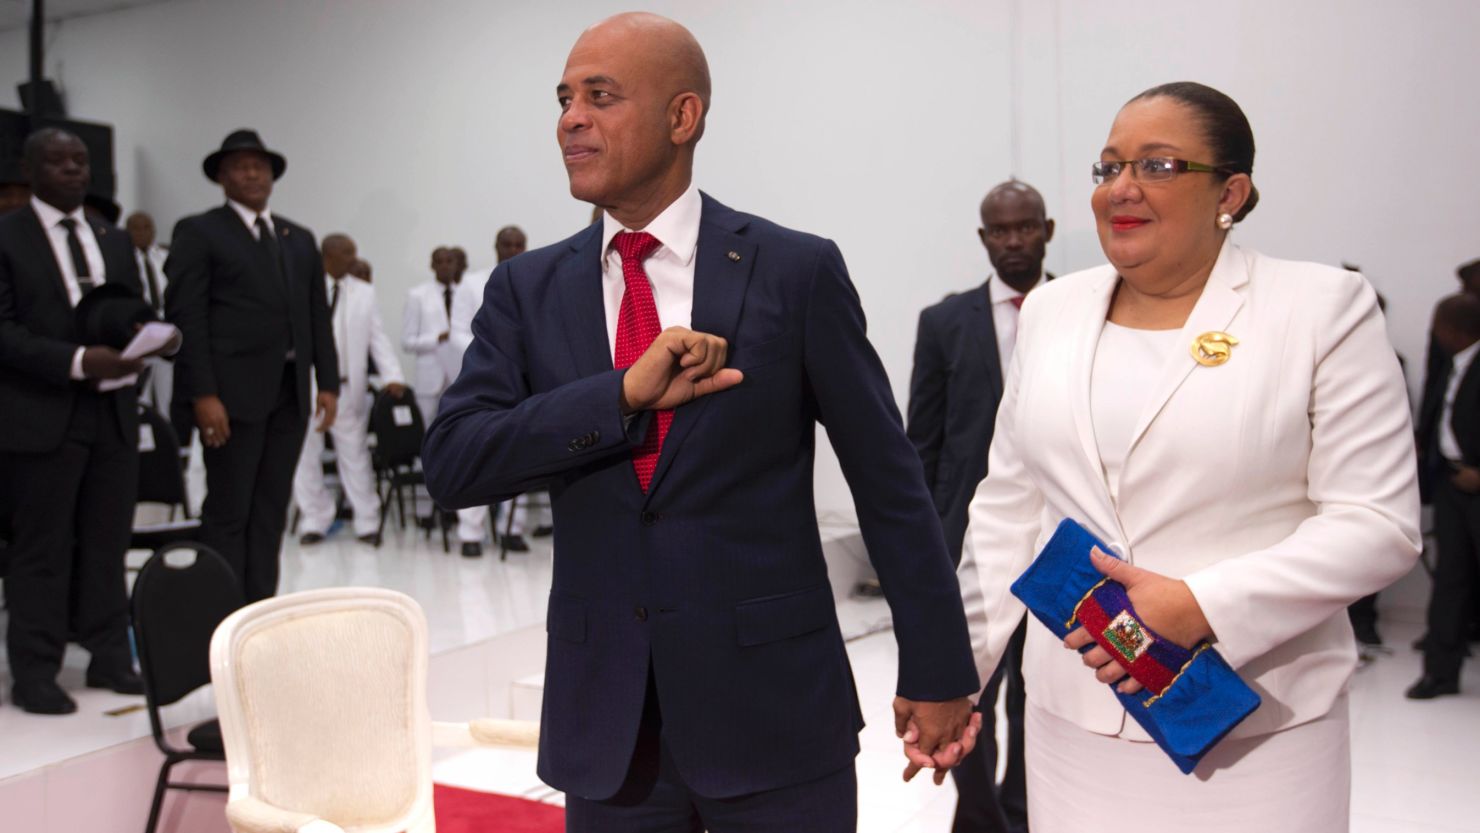 Michel Martelly, Haiti's outgoing President, stands with his wife, Sophia, before they leave parliament chambers in Port-au-Prince on Sunday.  